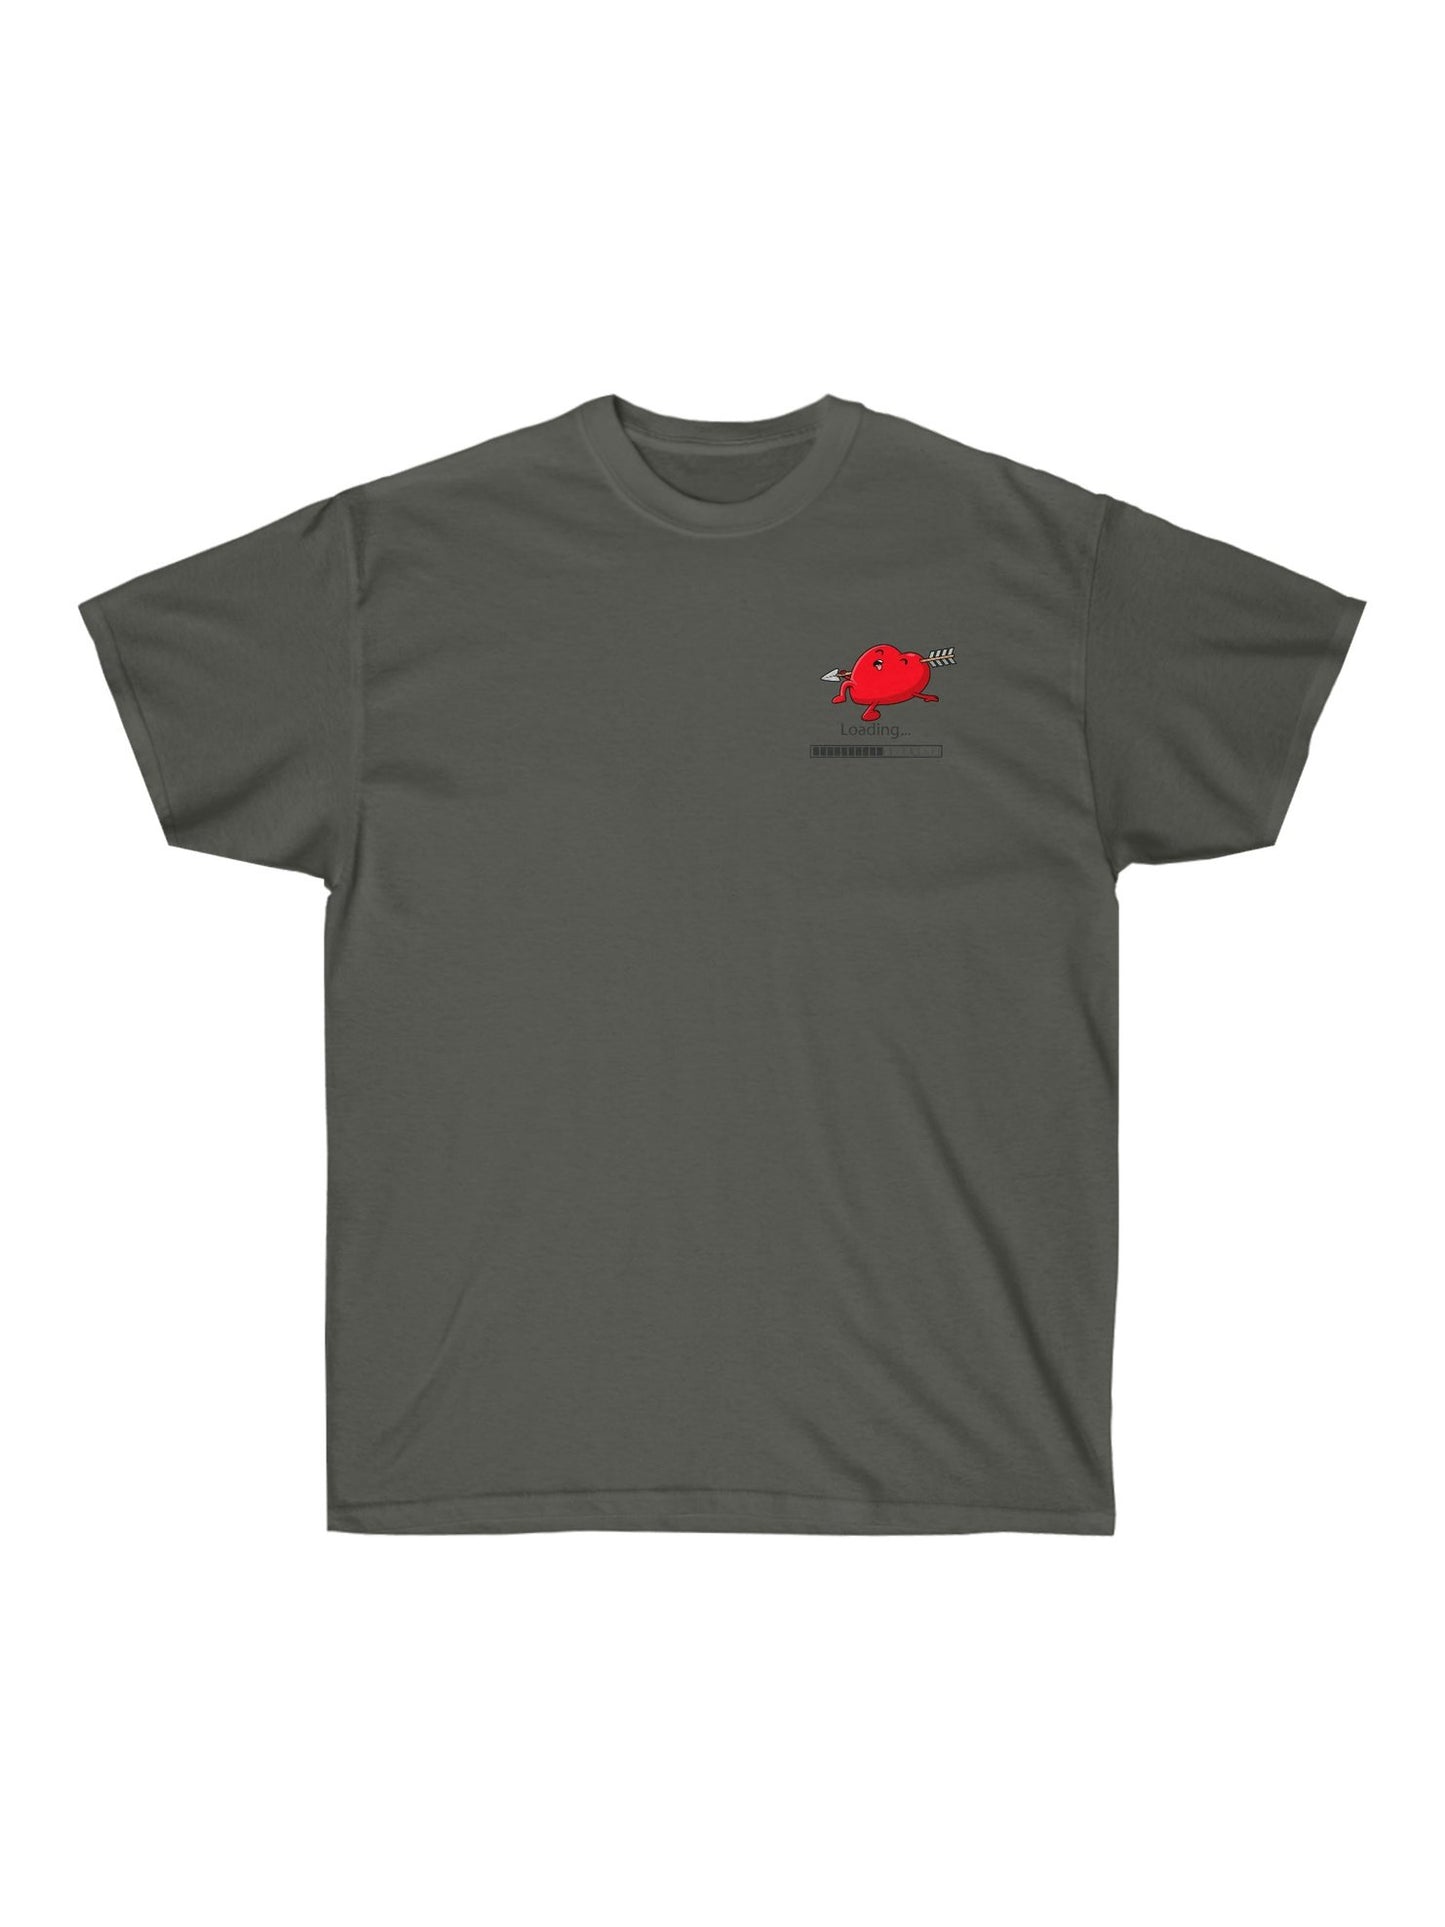 Stop Playing cupid Graphic tee